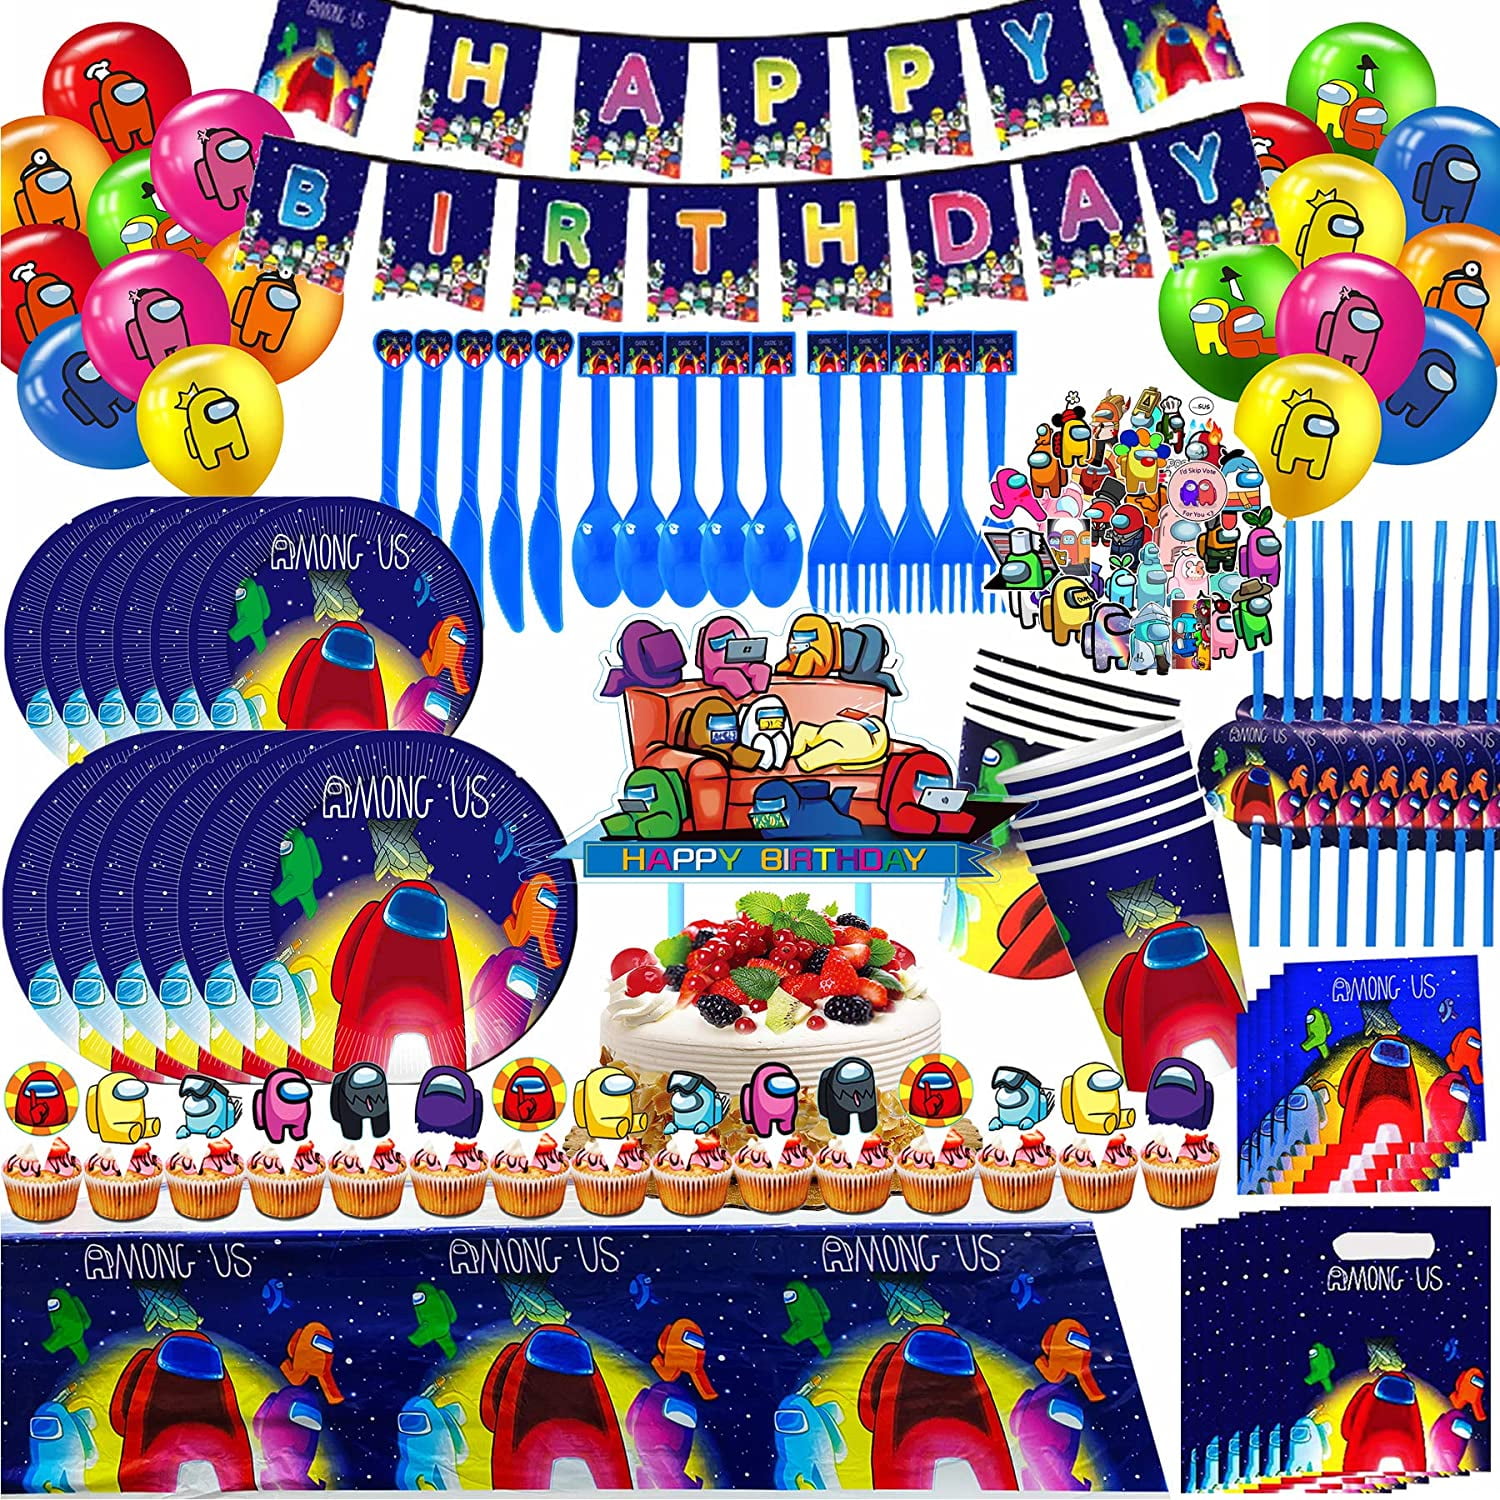 Among Us Party Decorations, Among Us Birthday Party Supplies for Boys